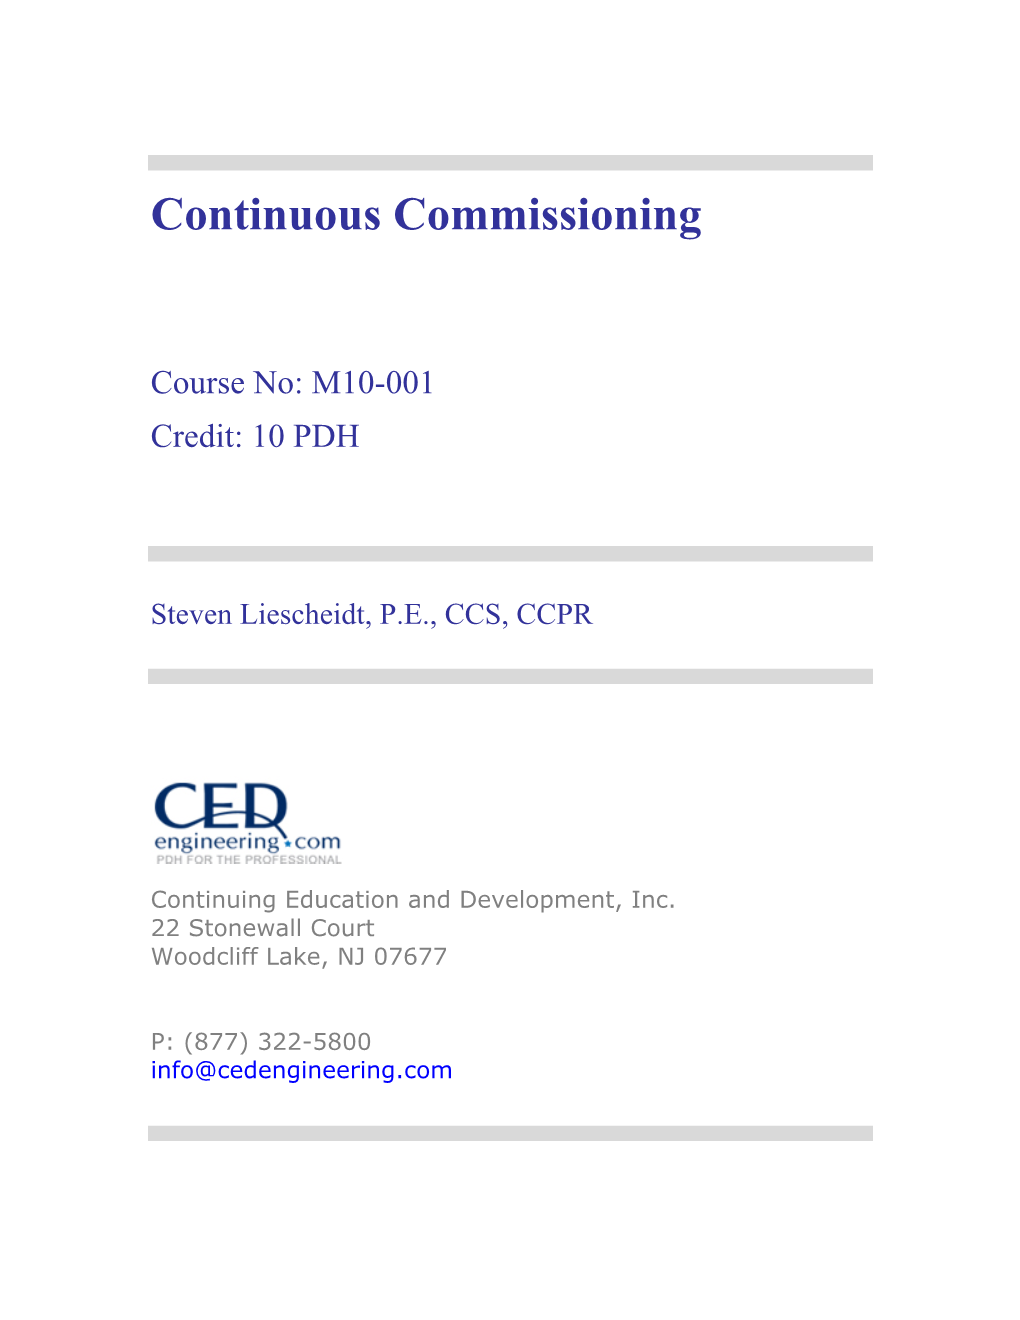 Continuous Commissioning Guidebook